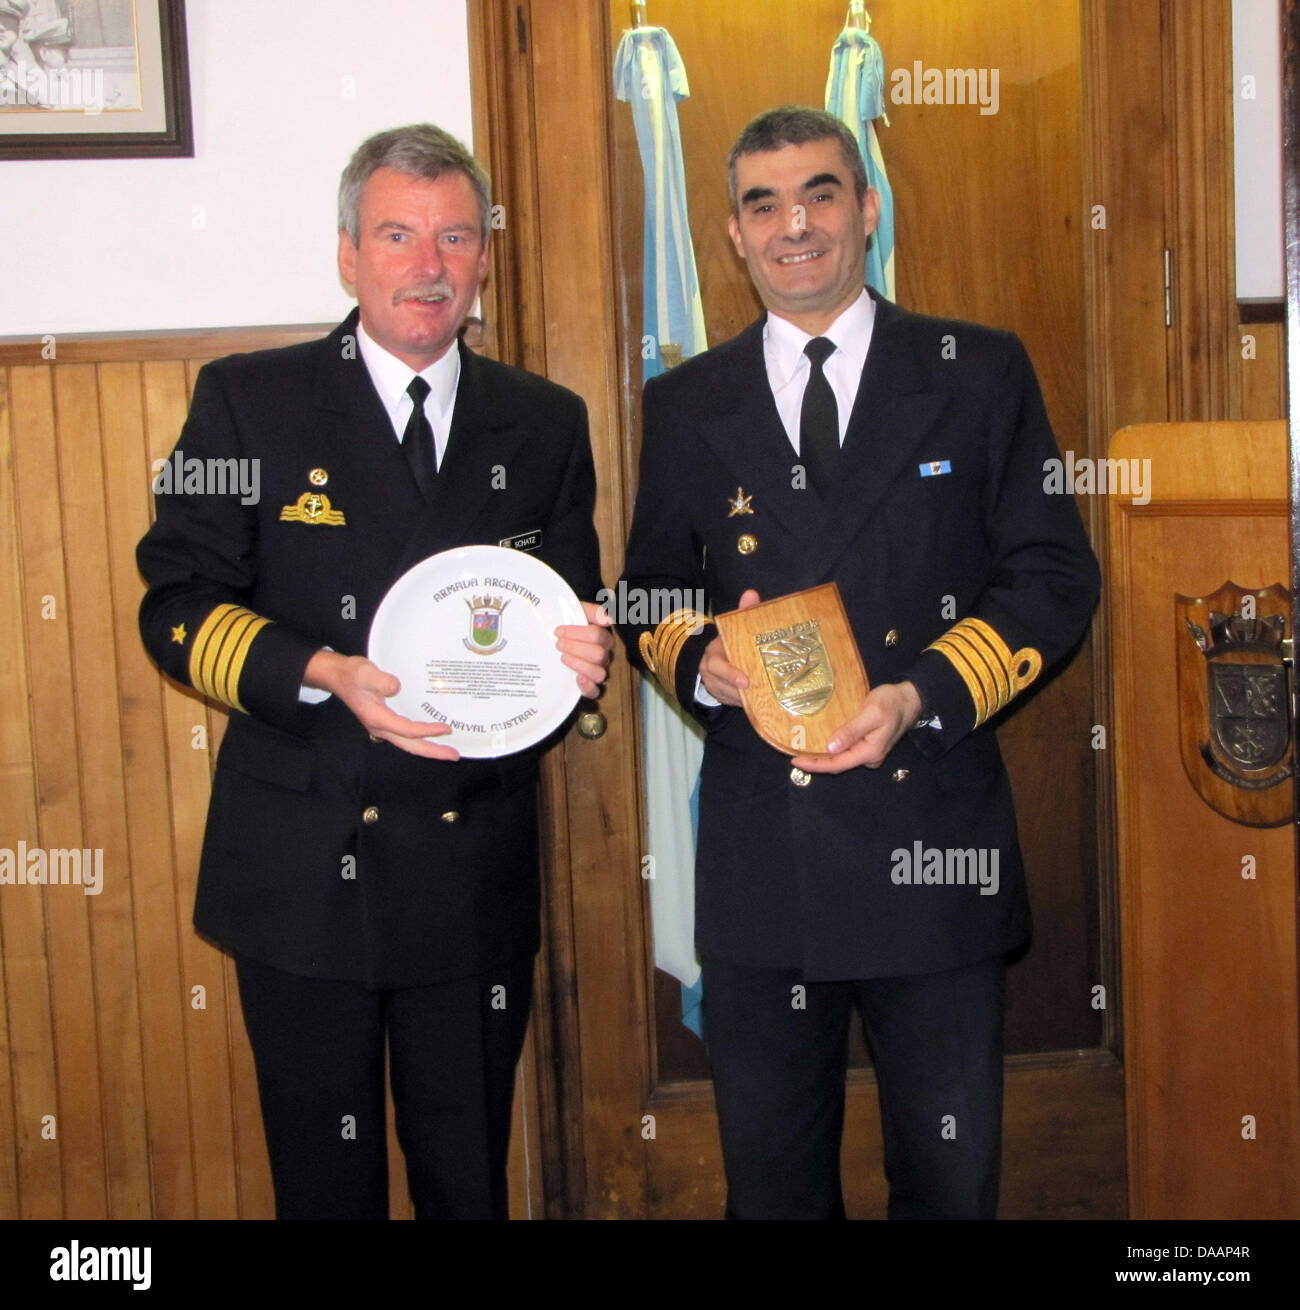 An Armada Argentina handout picture dated 17 January 2011 shows German Captain Norbert Schatz (L), commander of German naval training vessel 'Gorch Fock' meeting with Argentine Captain Marcelo Mario Davis (R) during a visit to the southern naval base in Ushuaia, Argentina. The 'Gorch Fock' is considered the German Navy's ambassador to the world's seas and a symbol of prestige. Howe Stock Photo